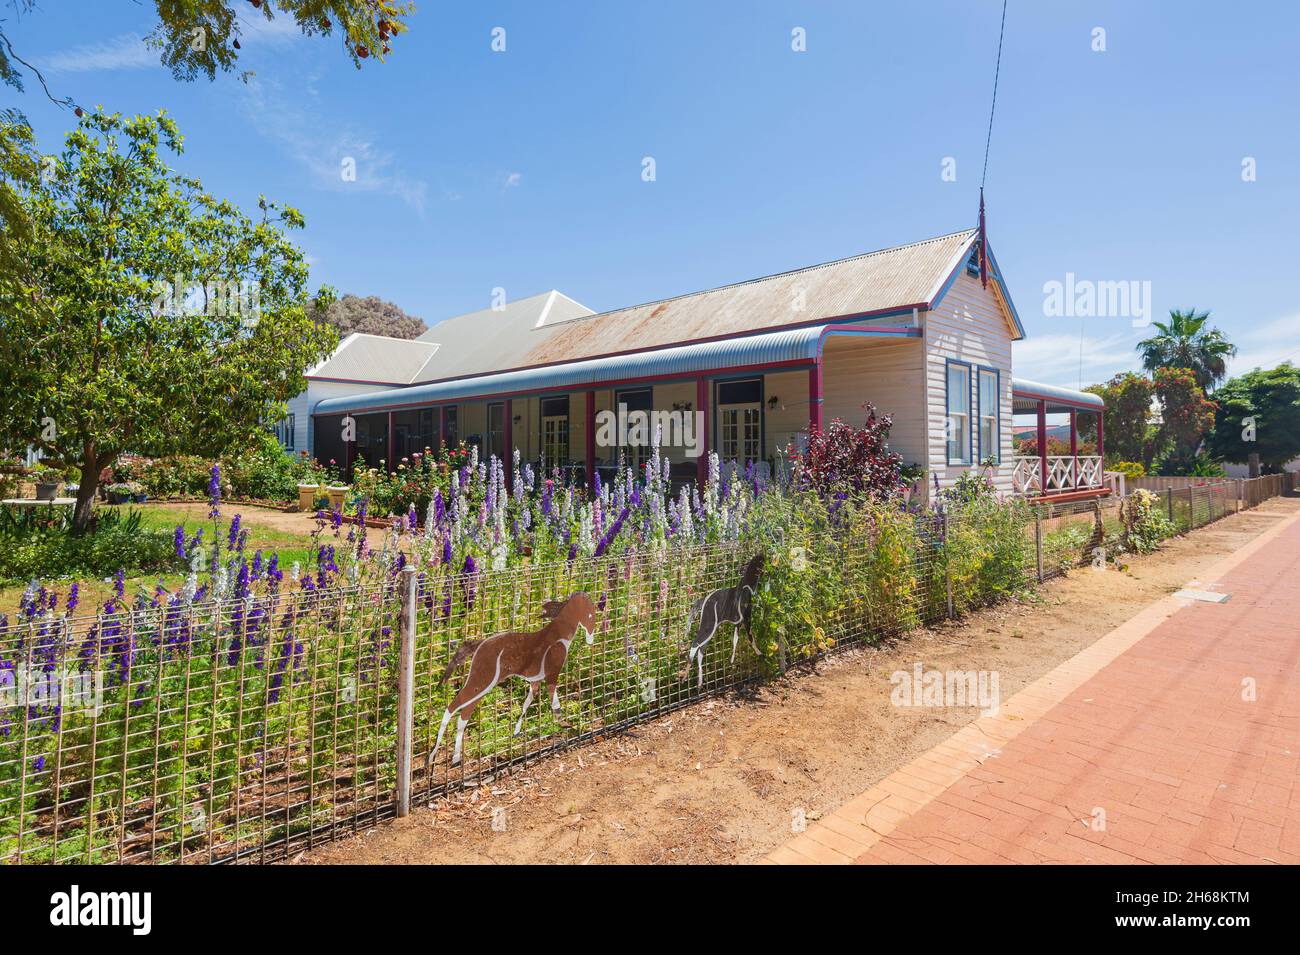 Romantic old timber cottage with flowers in the front garden, Kulin, Western Australia, WA, Australia Stock Photo